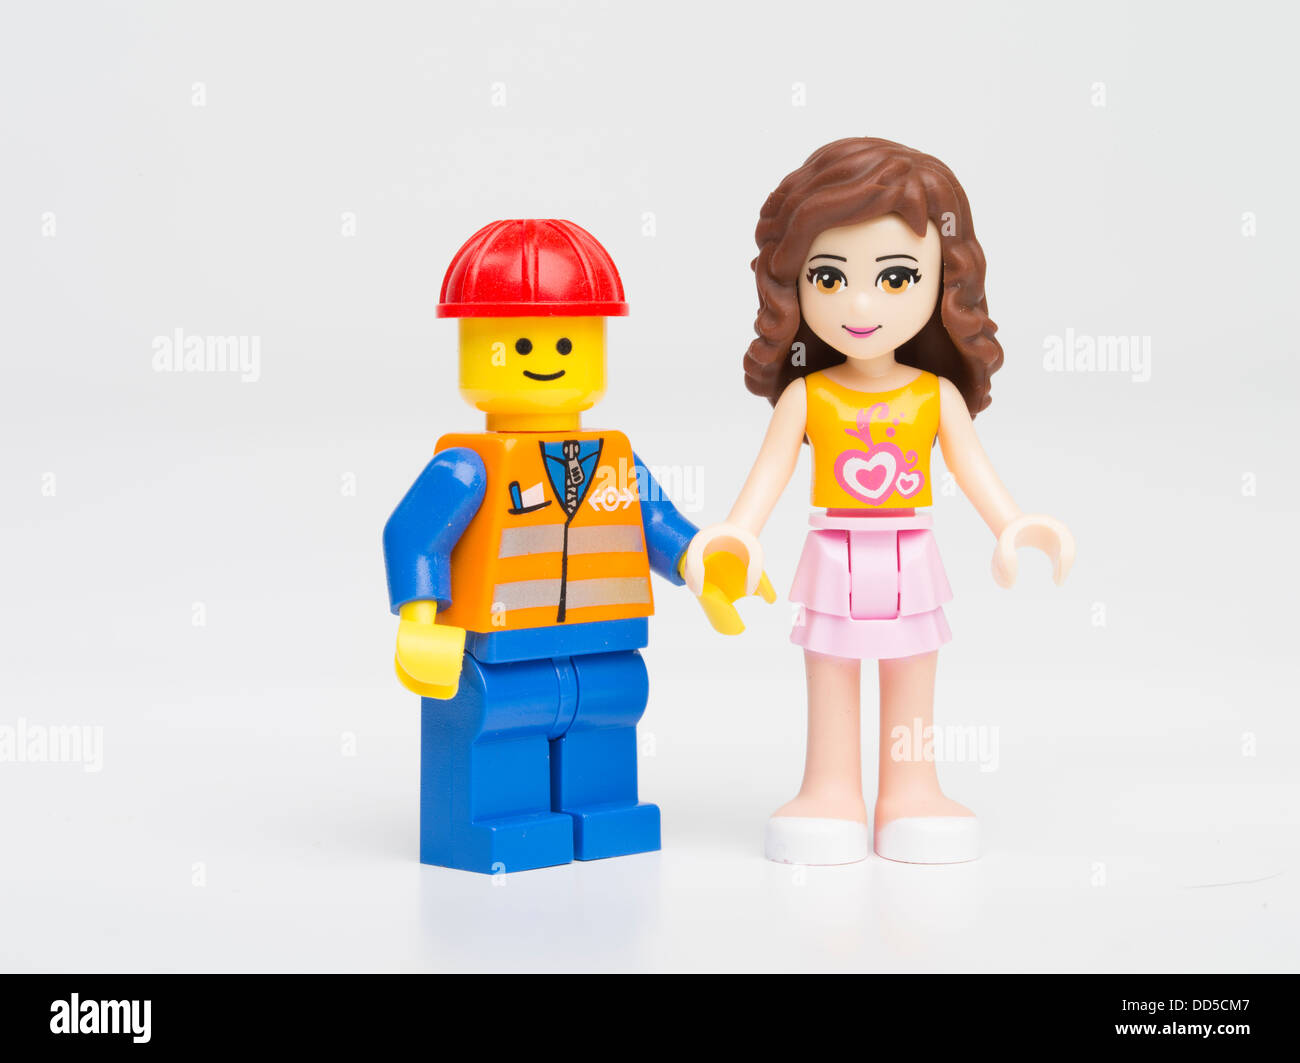 Olivia a Lego Friends mini-doll introduced in 2012 to appeal to girls, and  a traditional male minifigure Stock Photo - Alamy